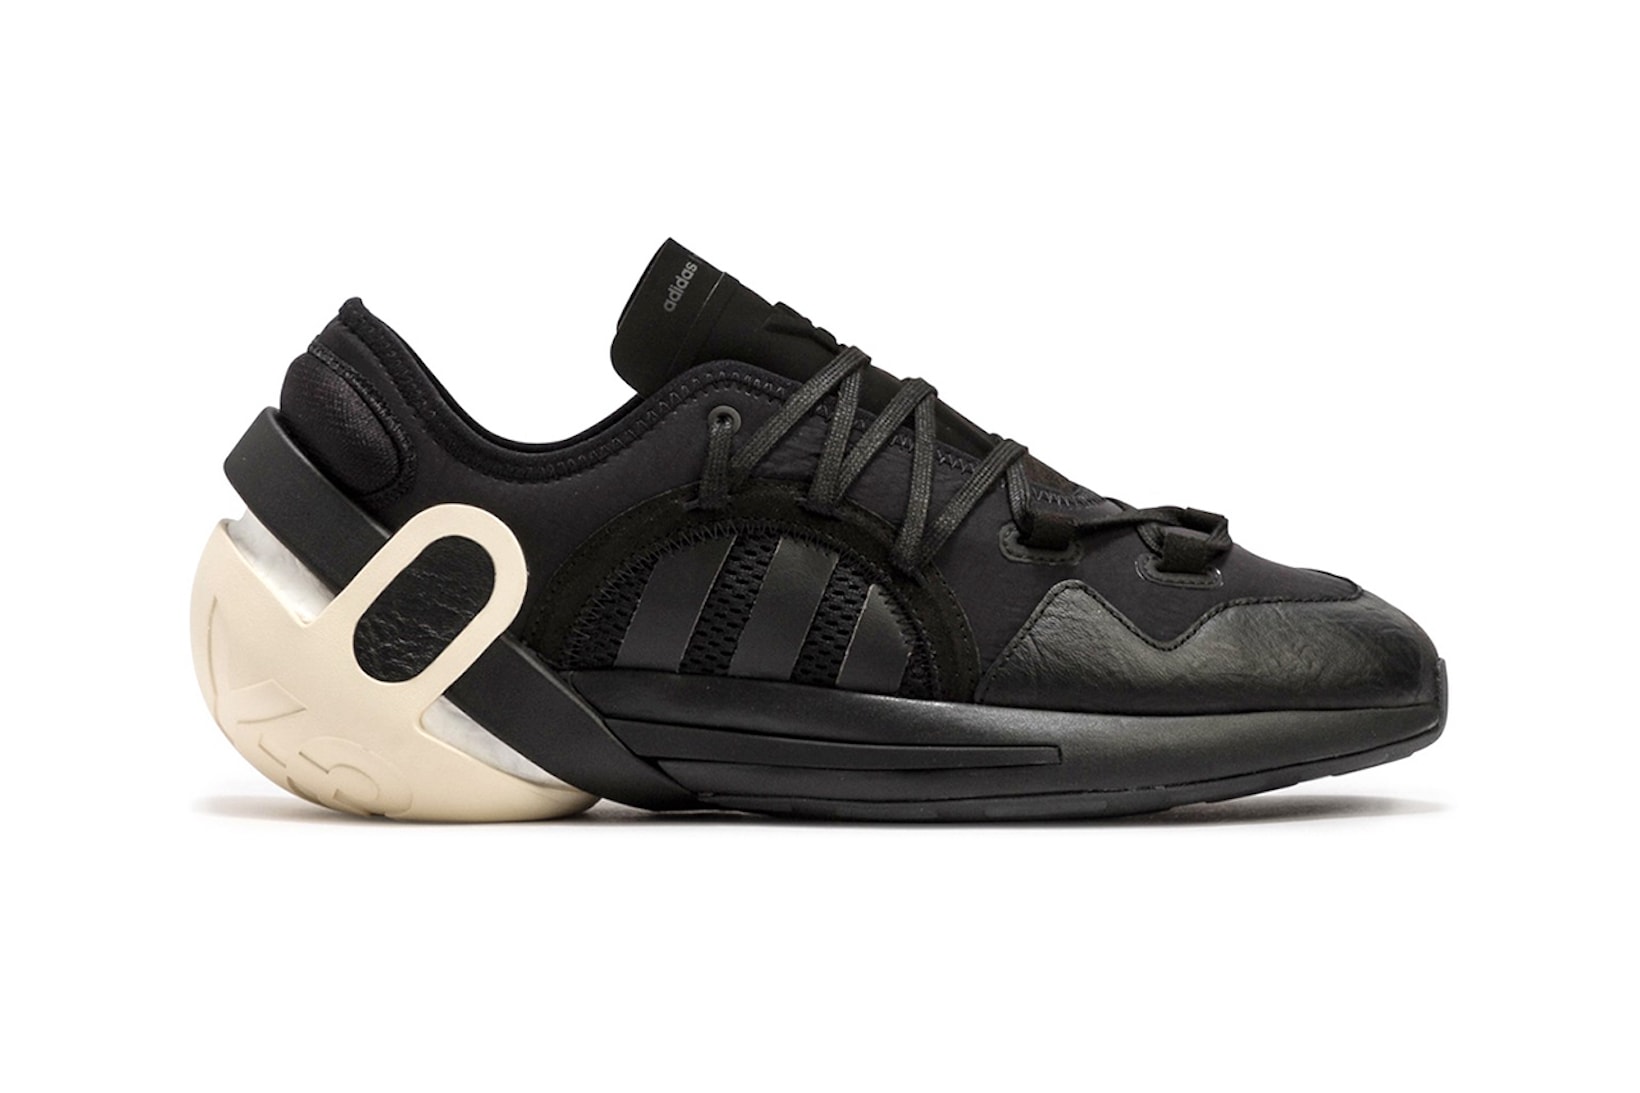 adidas Y-3 IDOSO BOOST Sneakers Footwear Shoes Black Cream Lateral